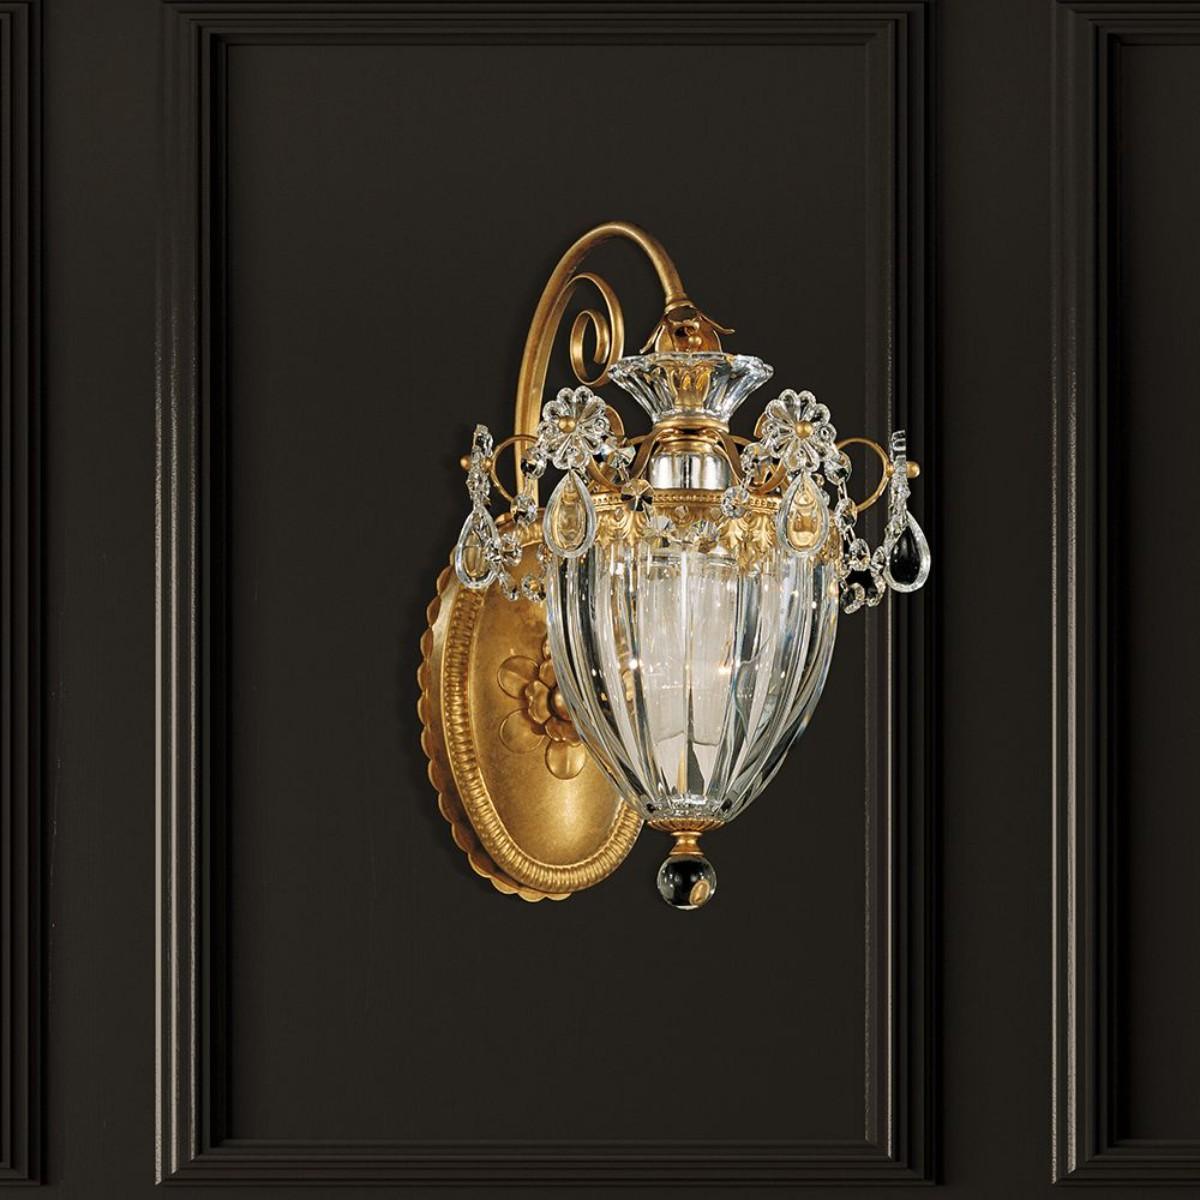 Bagatelle 13 inch Armed Sconce - Bees Lighting